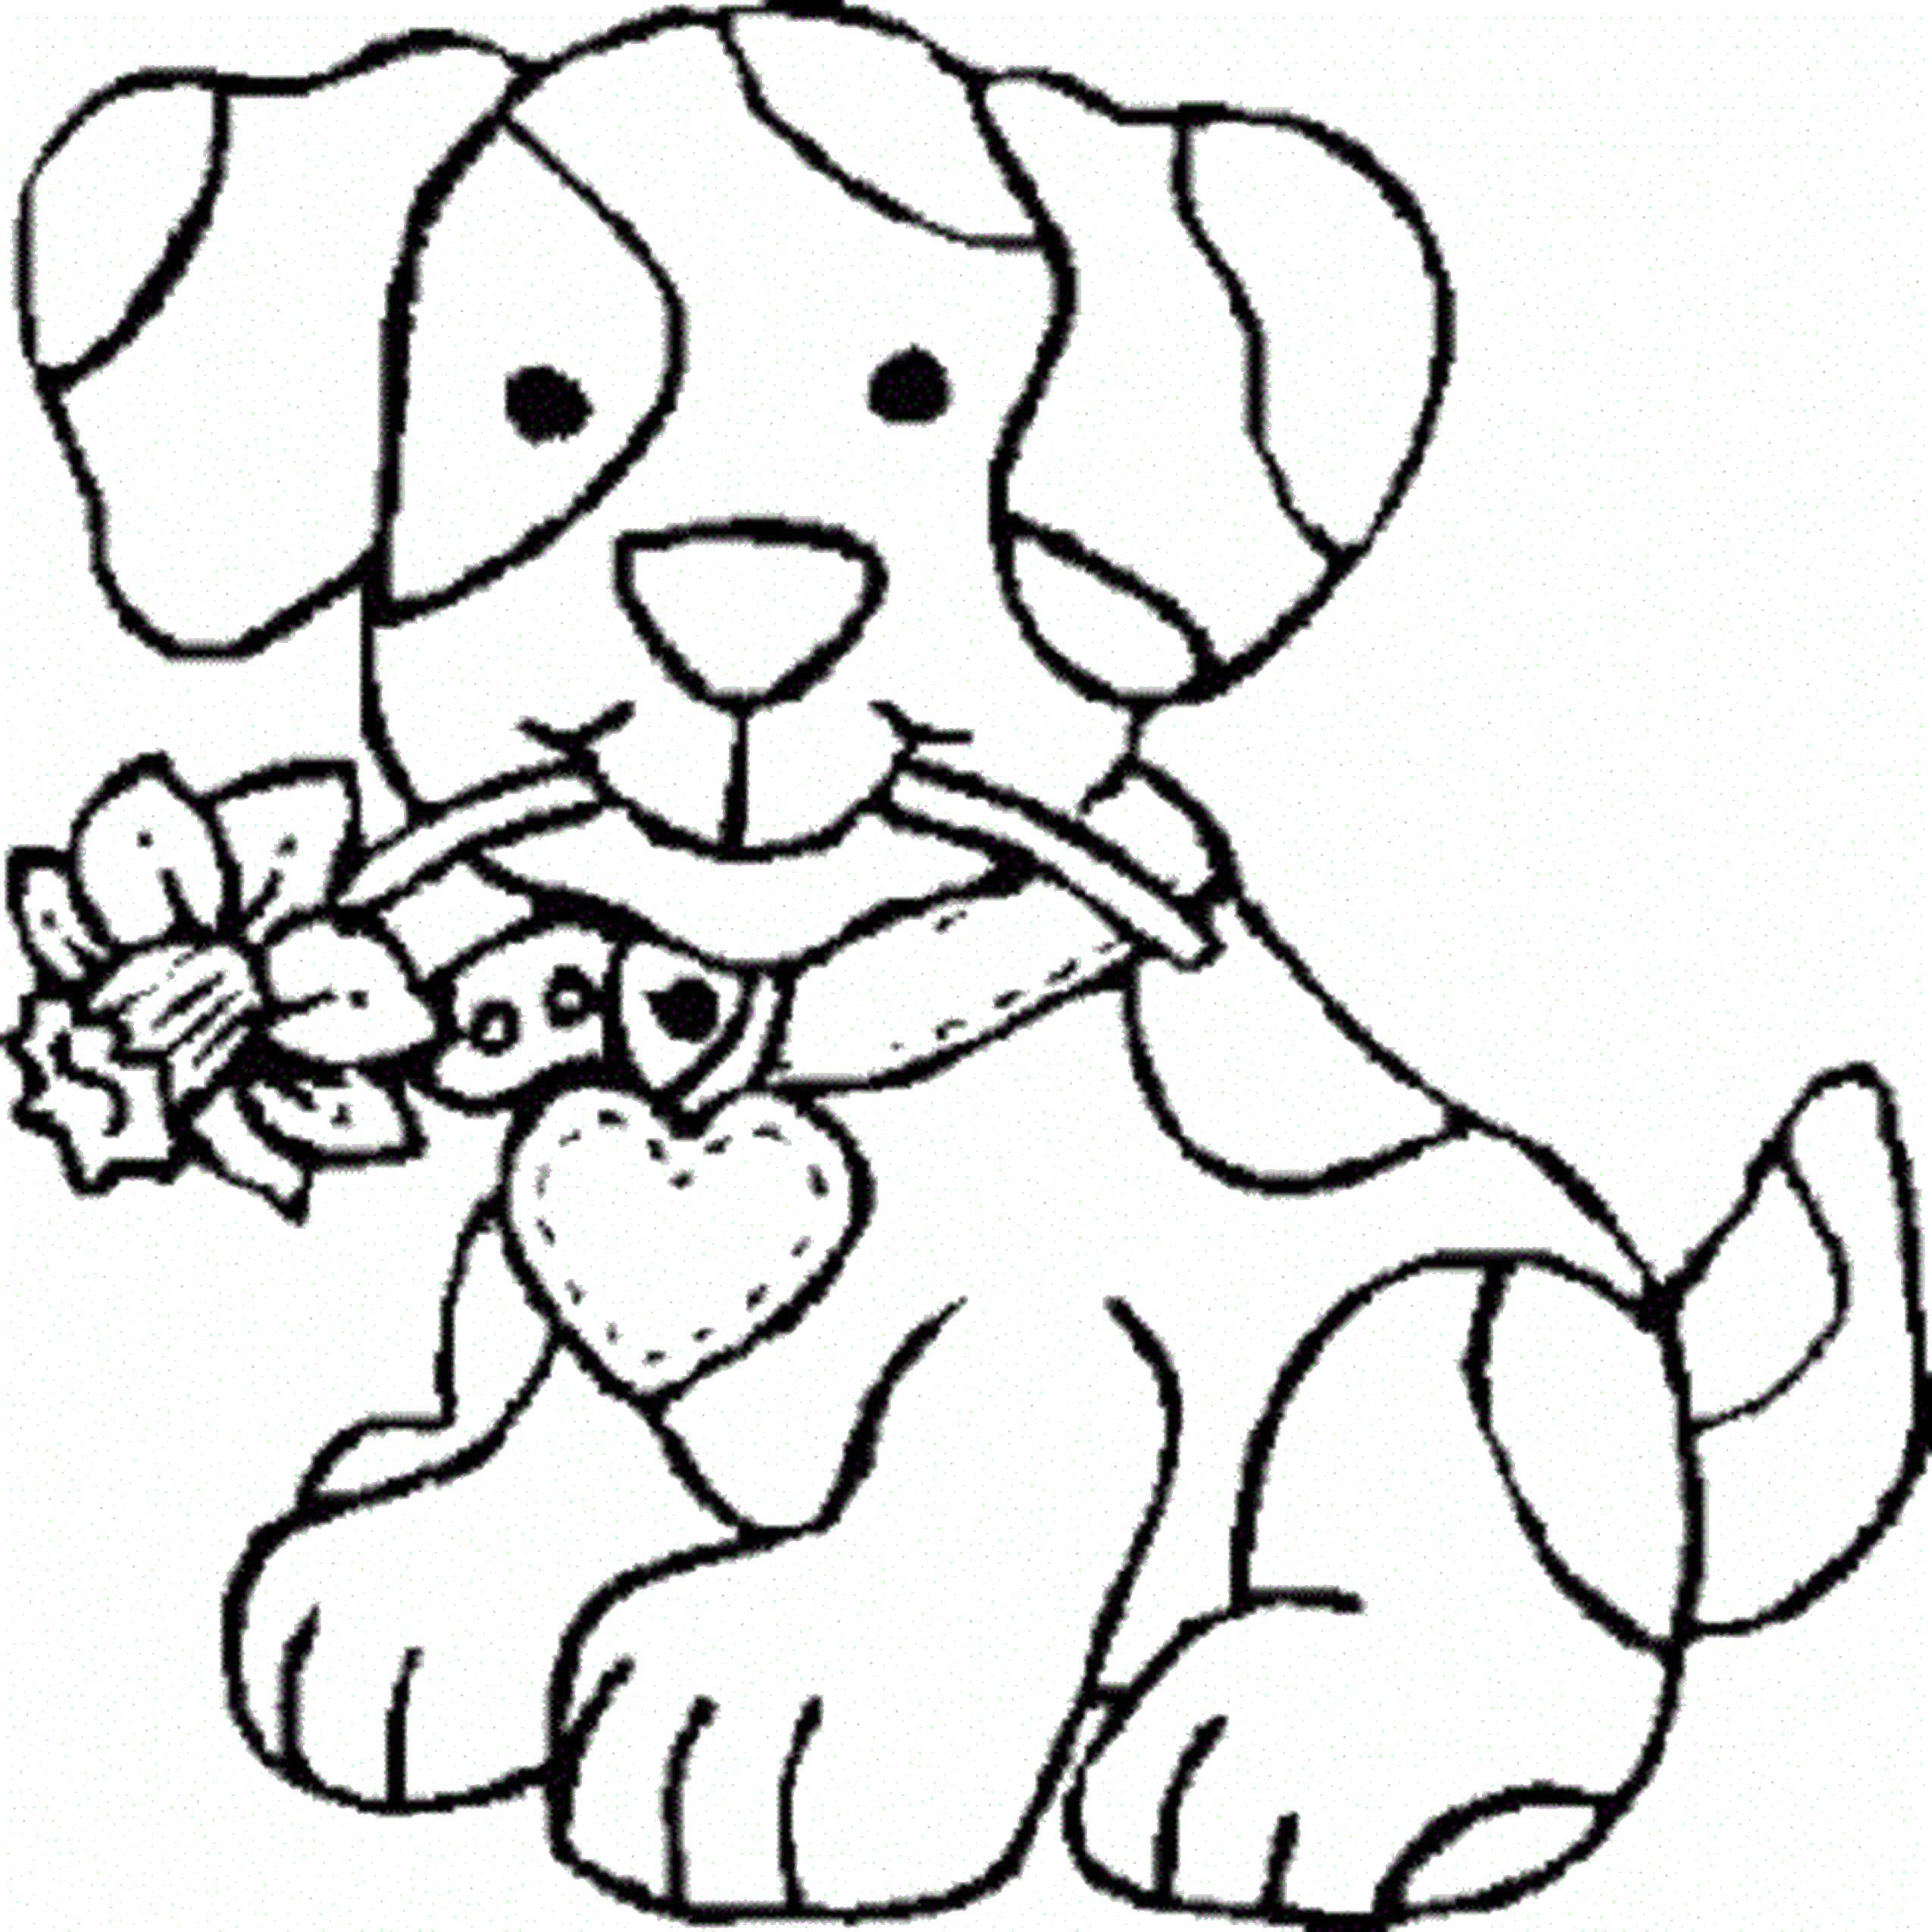 Coloring Puppy holding a flower in his teeth. Category Animals. Tags:  Animals, dog.